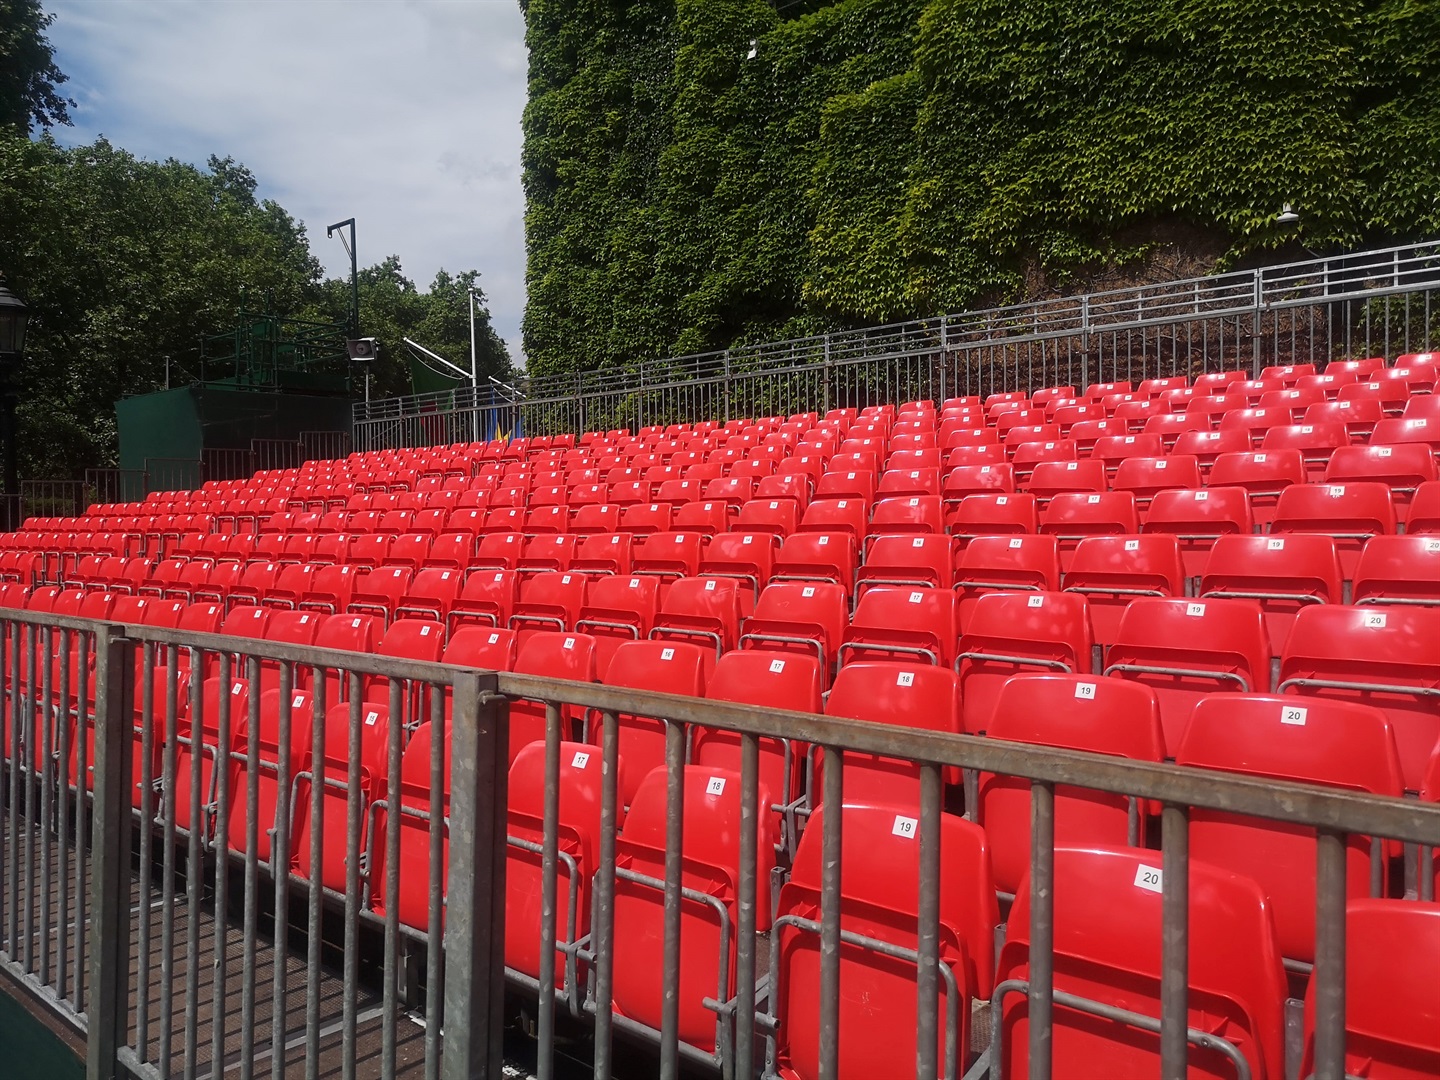 Empty seats after the Trooping the Colour royal event in London.